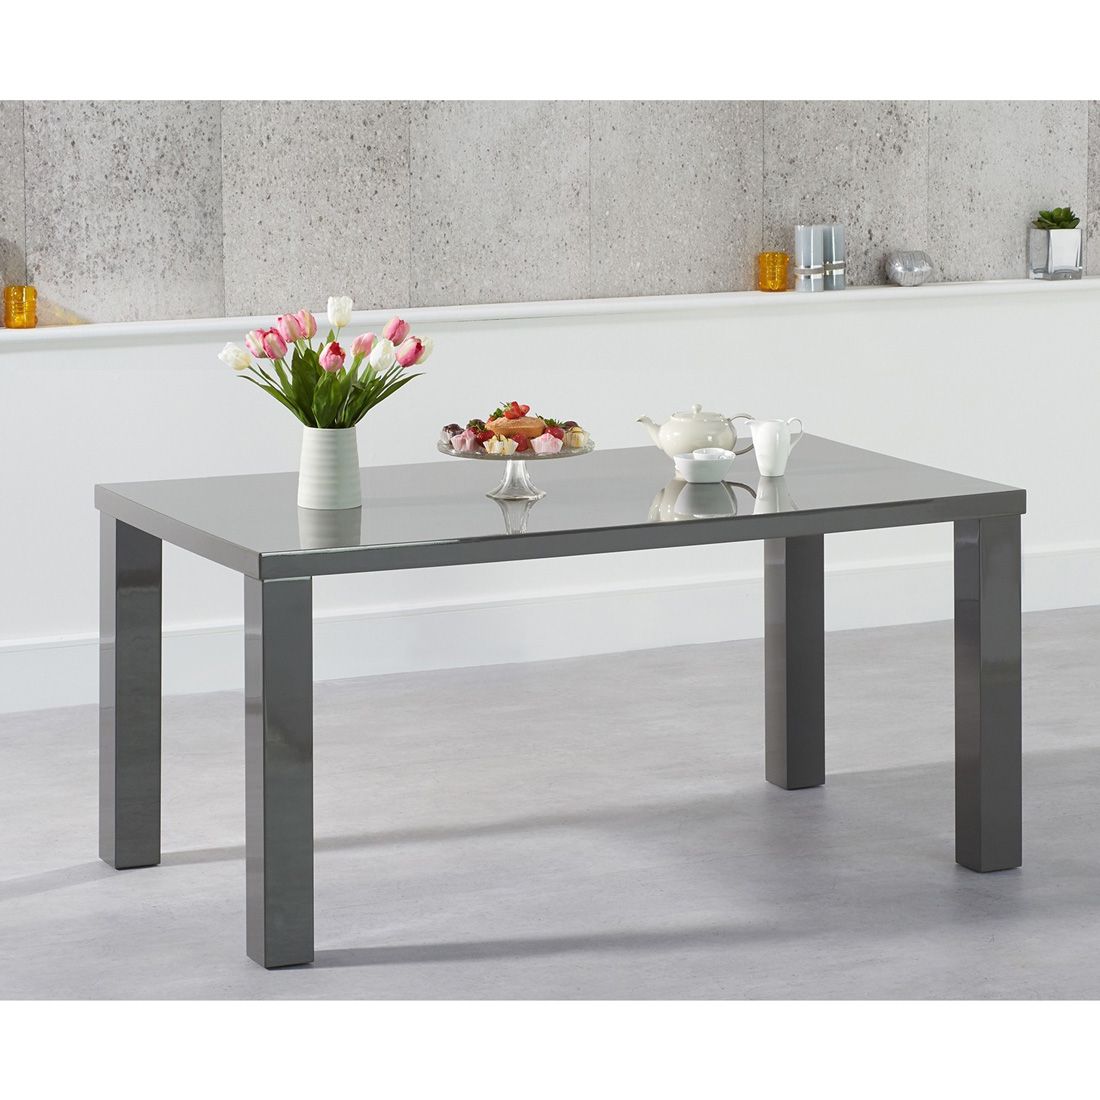 Luna Dark Grey Gloss Dining Table – 4 Sizes Available | Fads Within 2017 Glossy Gray Dining Tables (View 2 of 15)